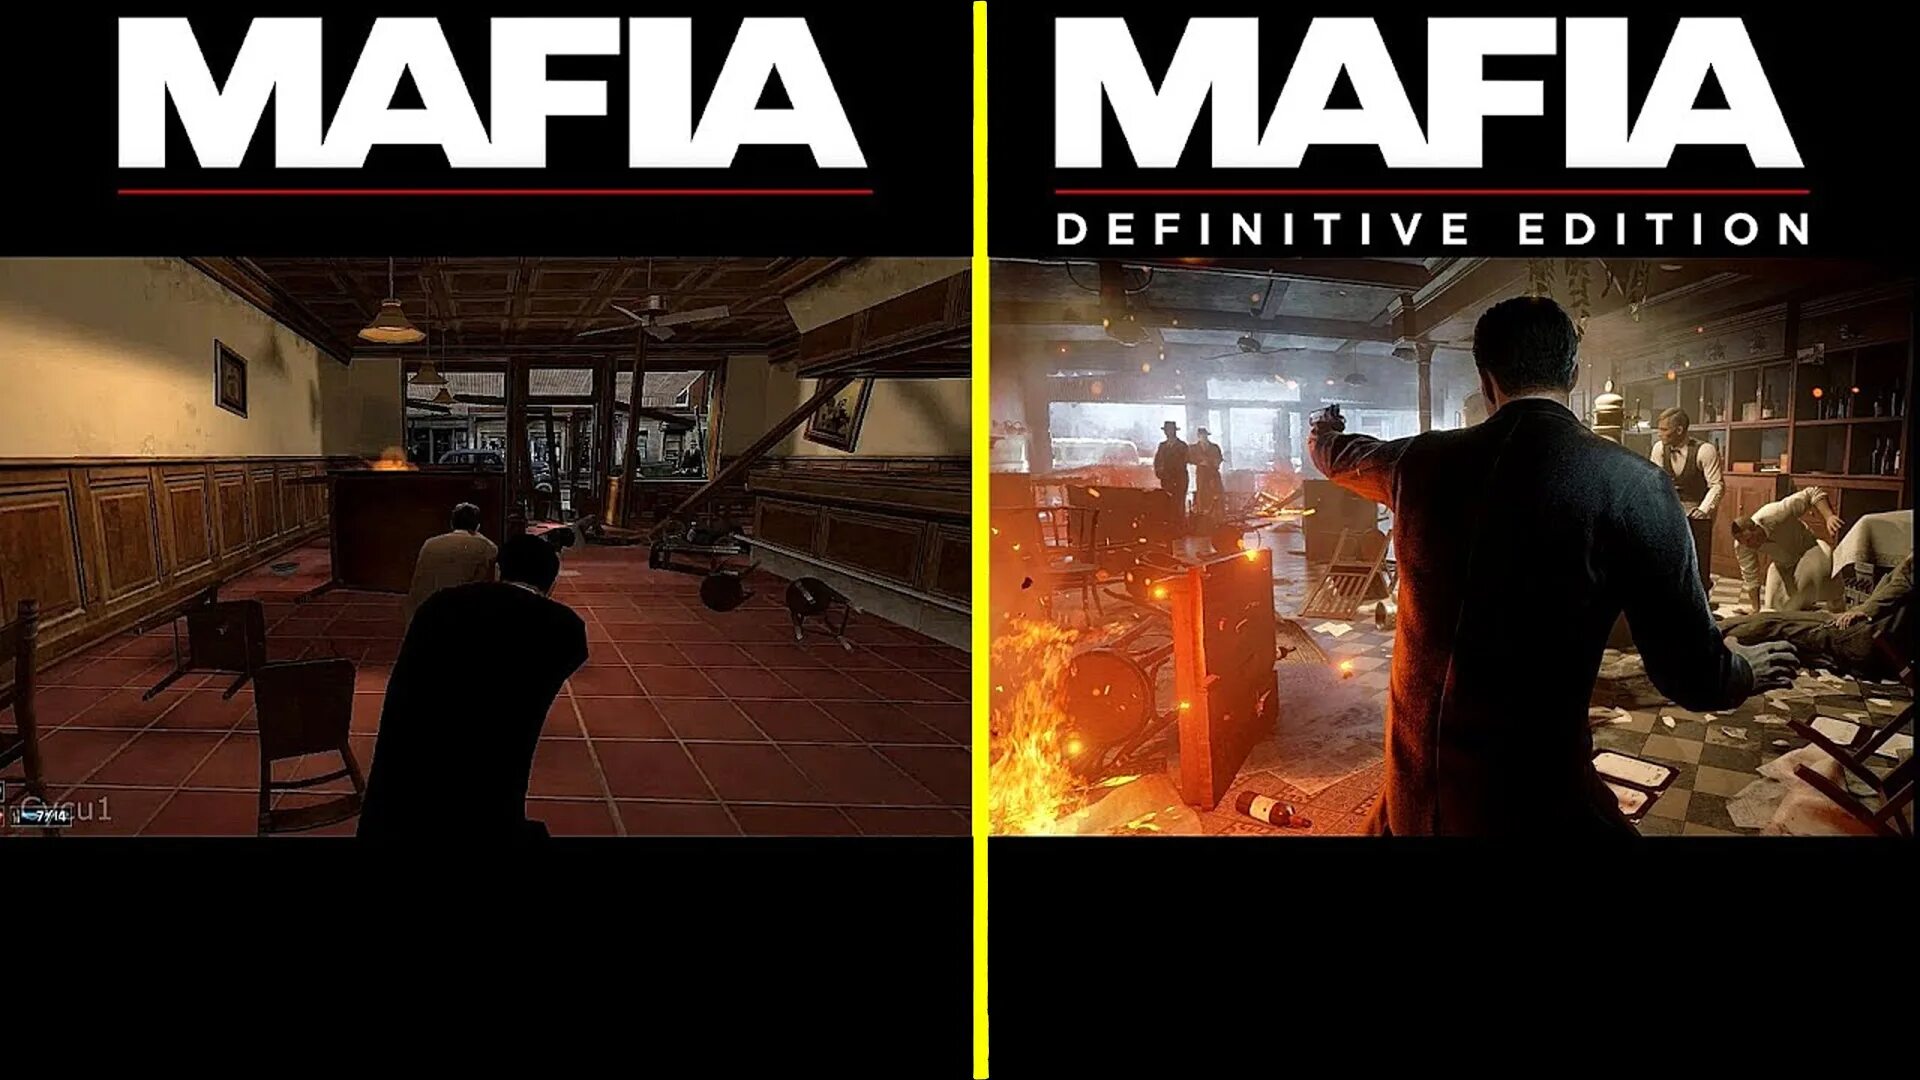 Mafia: Definitive Edition. Mafia 2 Definitive Edition ps4. Mafia 1 Definitive Edition. Мафия 3 Definitive Edition ps4.